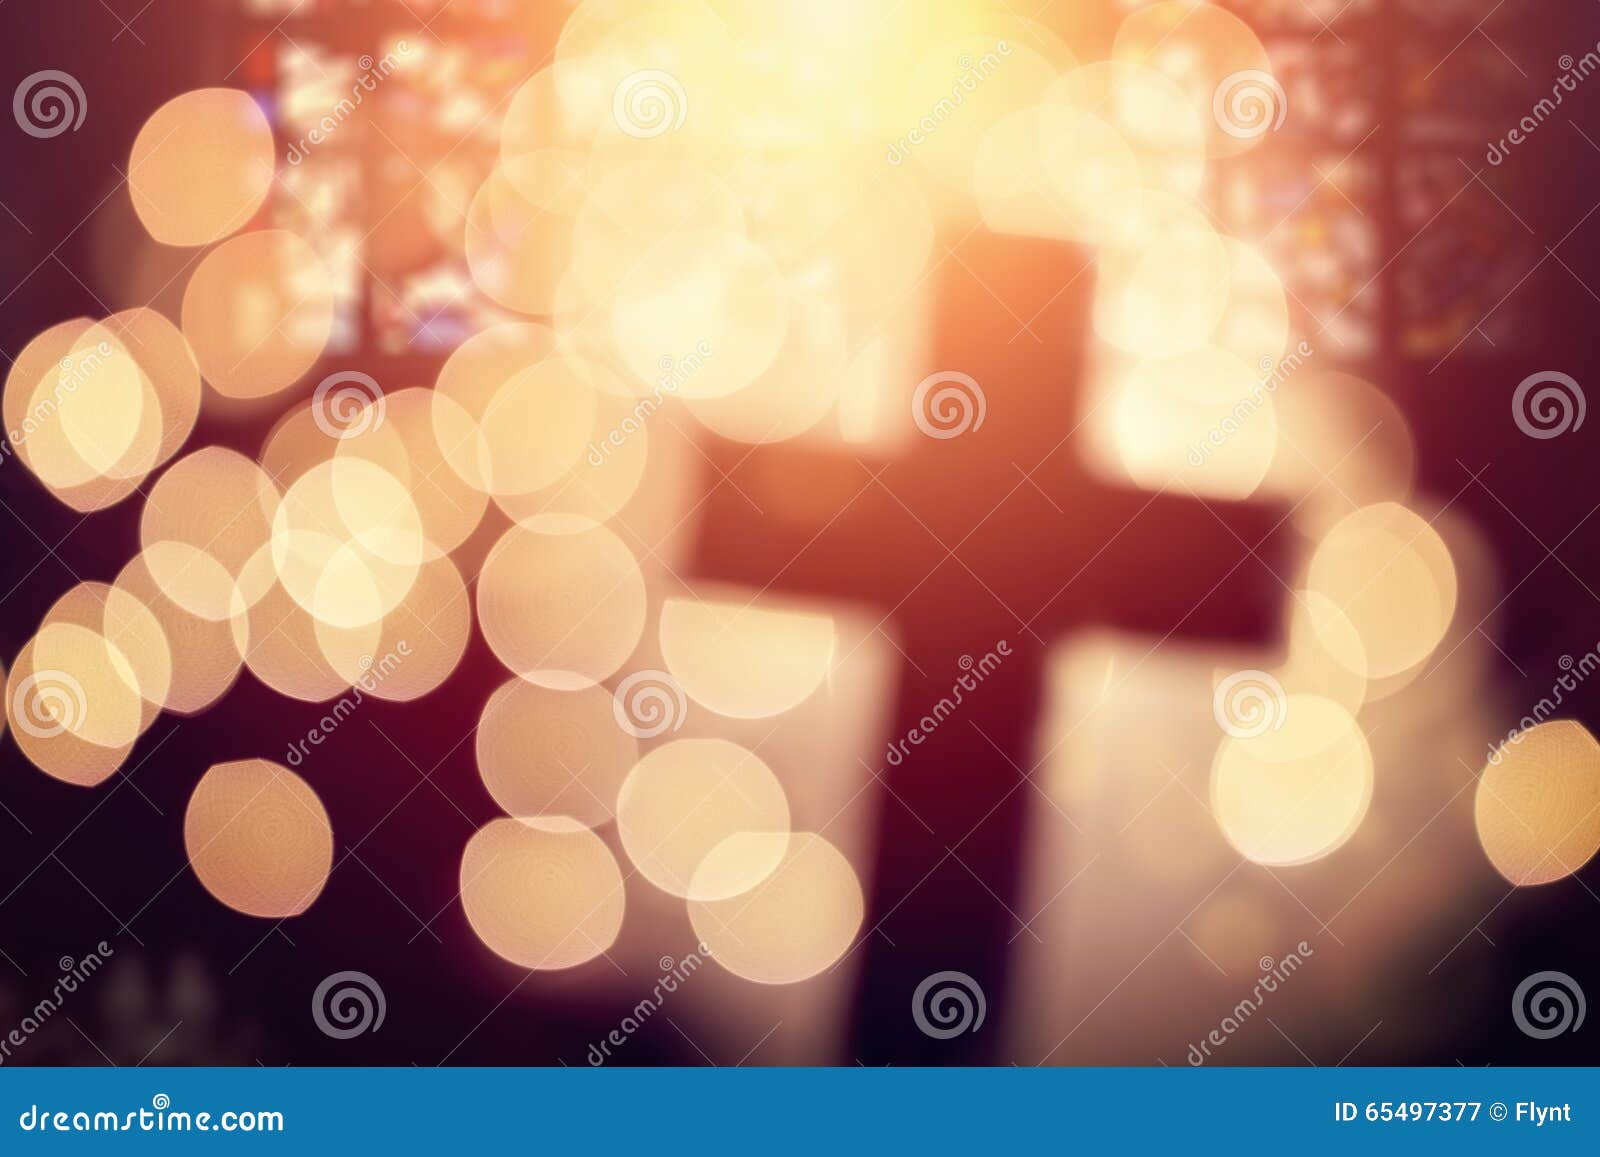 Abstract Religious Background Wallpaper Image For Free Download - Pngtree